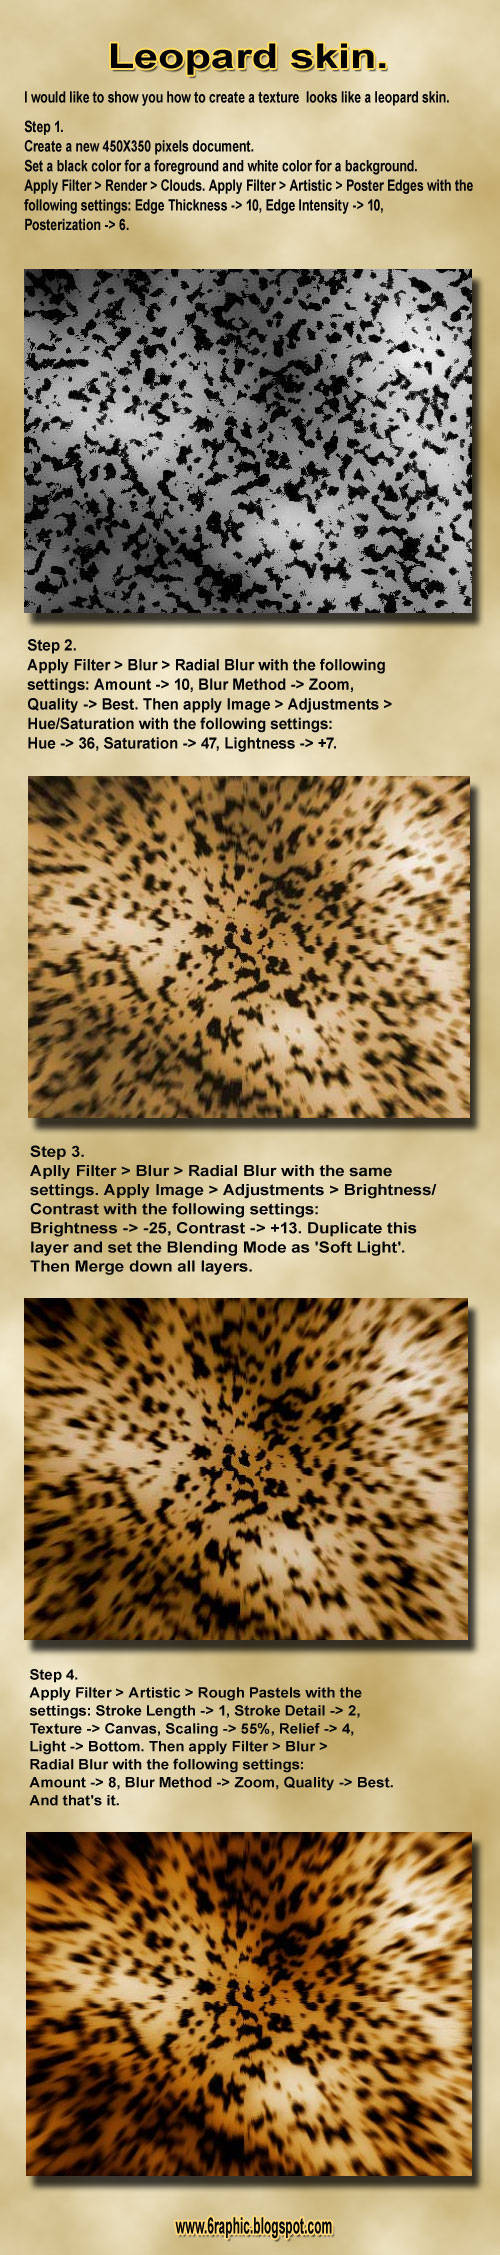 Creating Leopard Skin with Photoshop